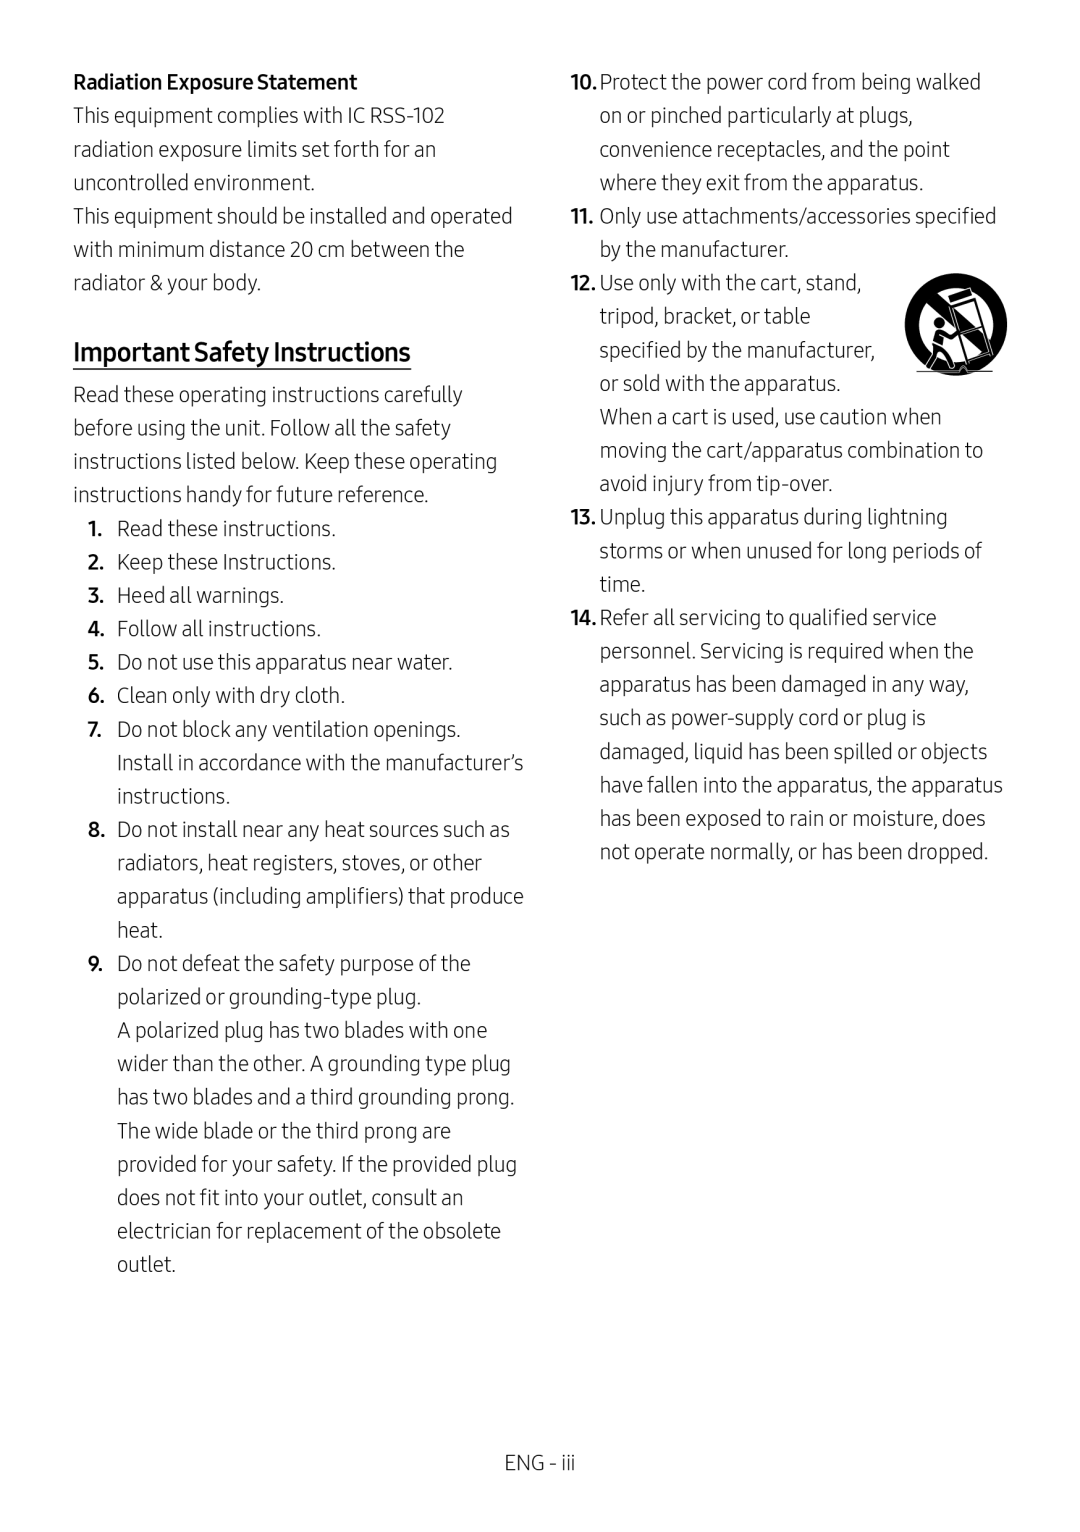 Important Safety Instructions Standard HW-MS650